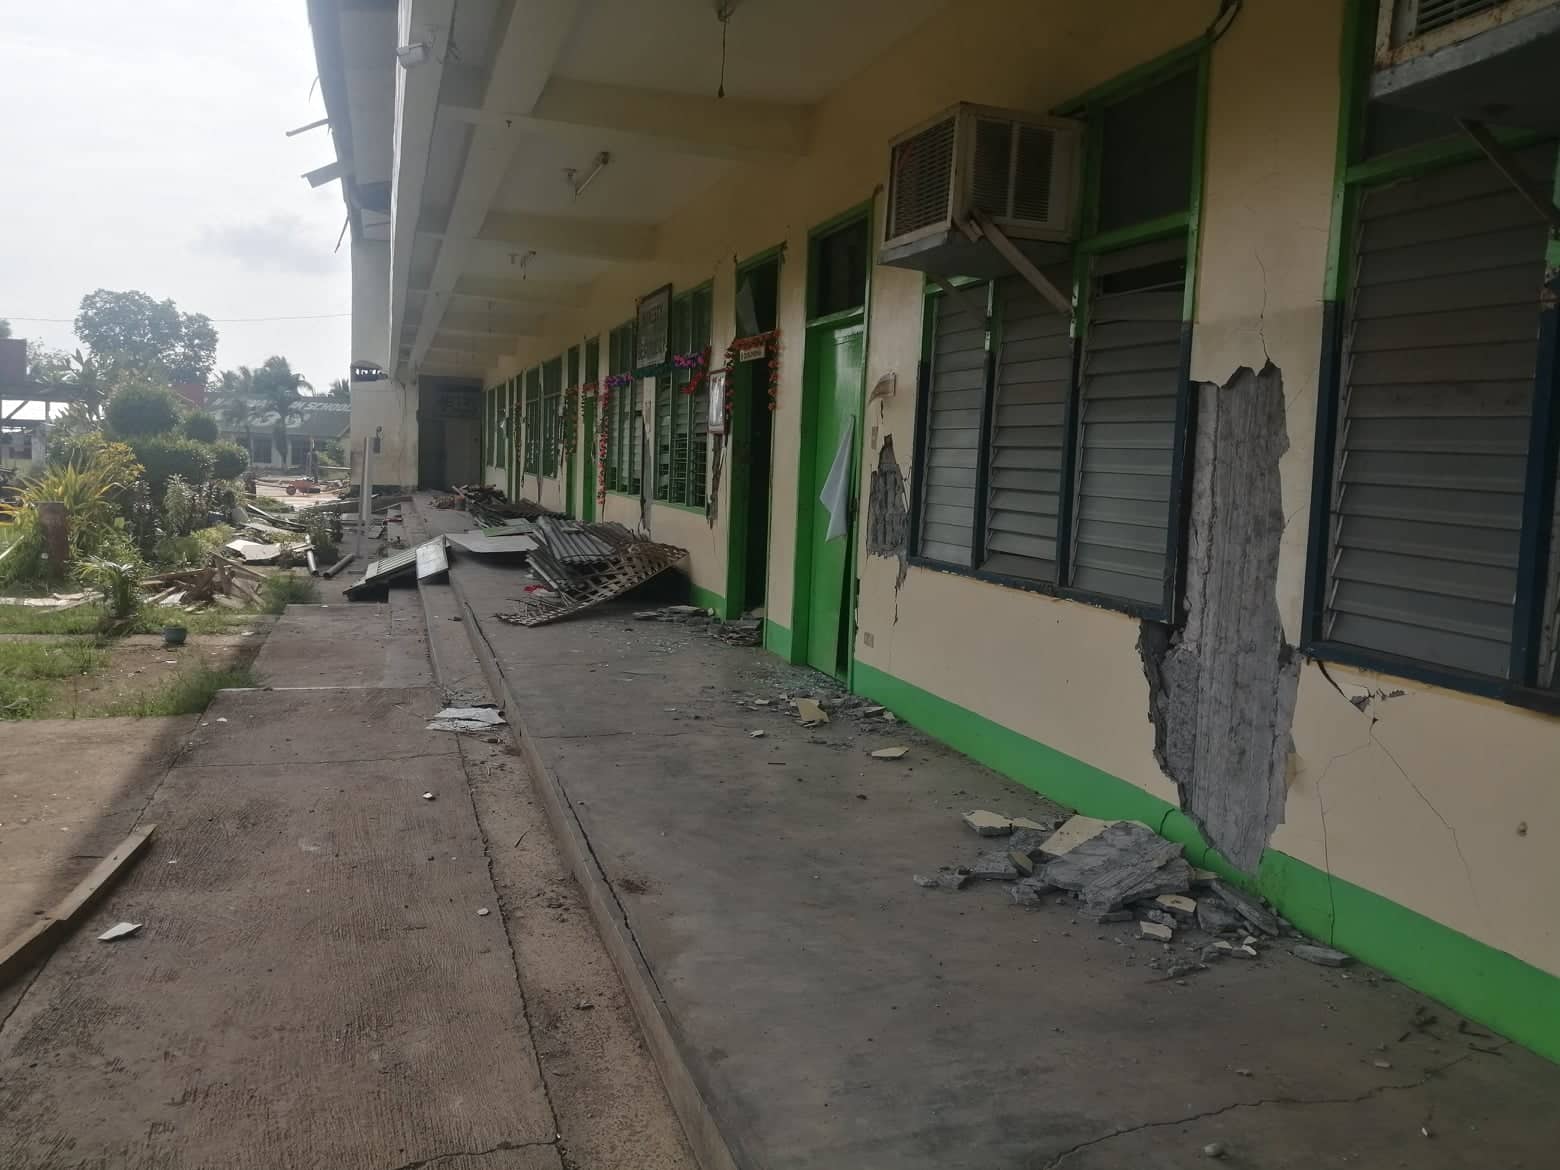 BUILDING 1. Due to severe damage and falling hazards, the building is now off limits. Photo from QC DRRMC 